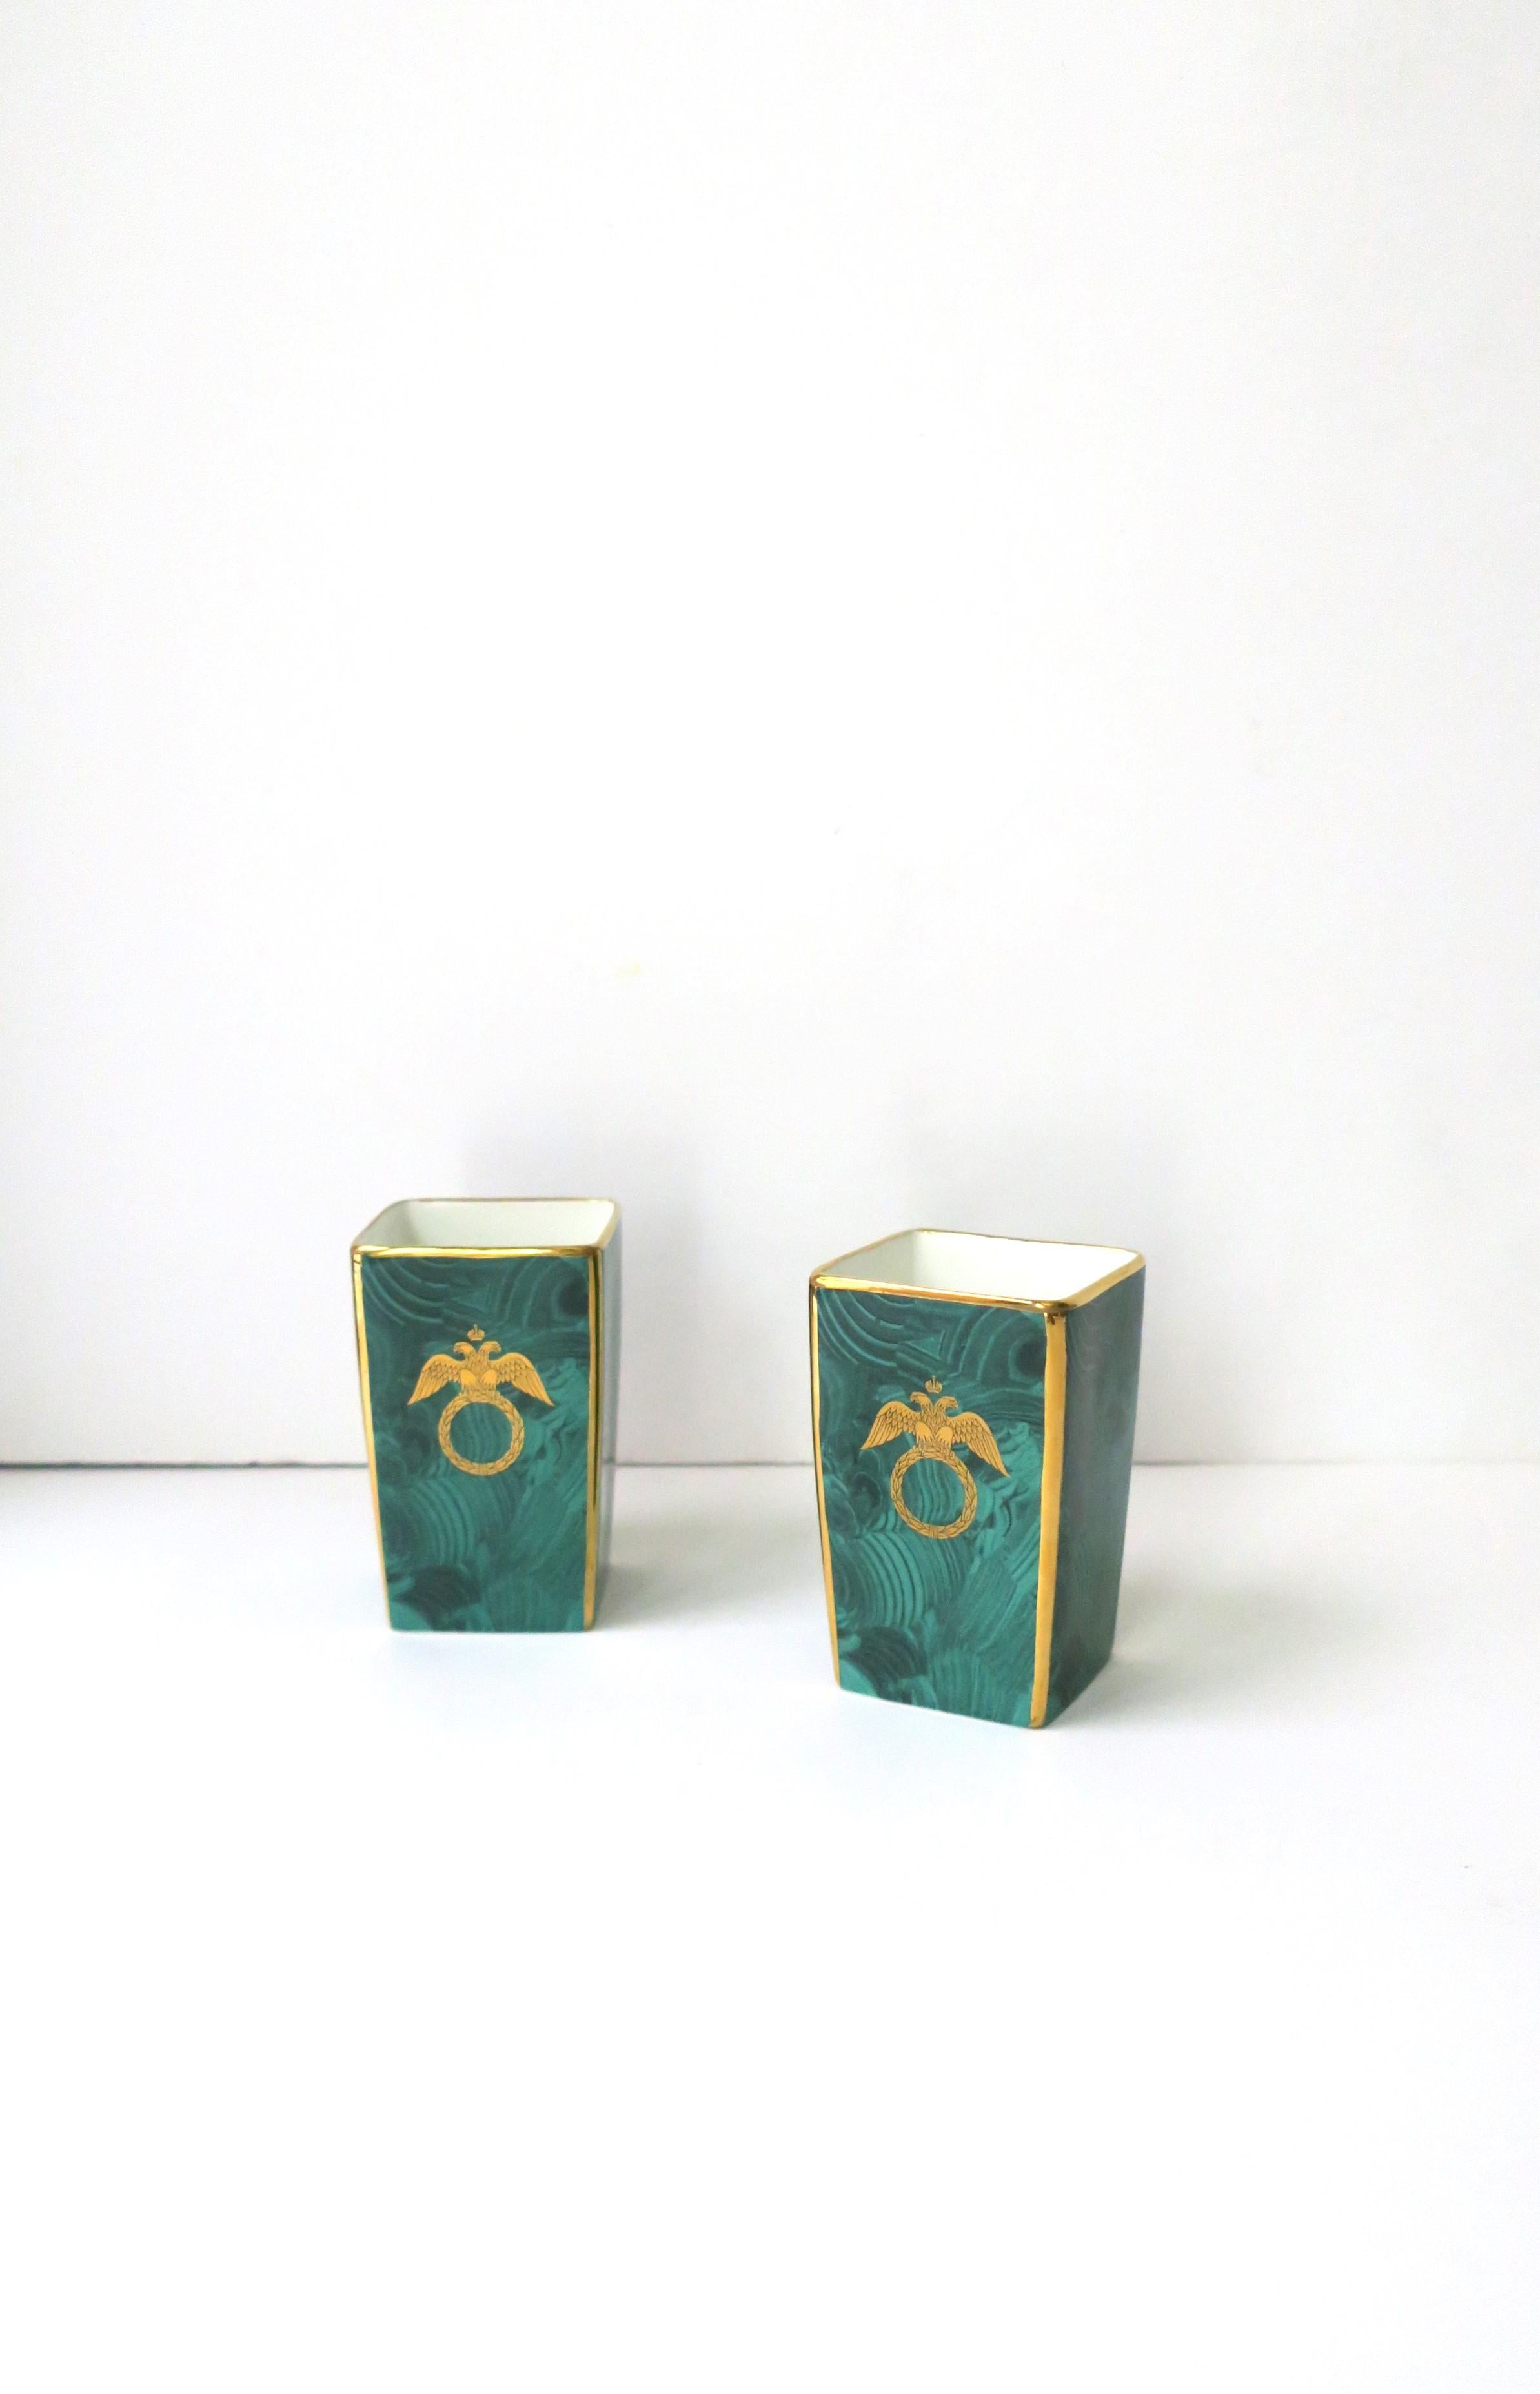 A pair of English green malachite porcelain desk pen holders or vanity vases, in the Federal style, circa late-20th century, England. Pair are porcelain with a green malachite-style exterior, a gold wreath and eagle bird with crown design in gold